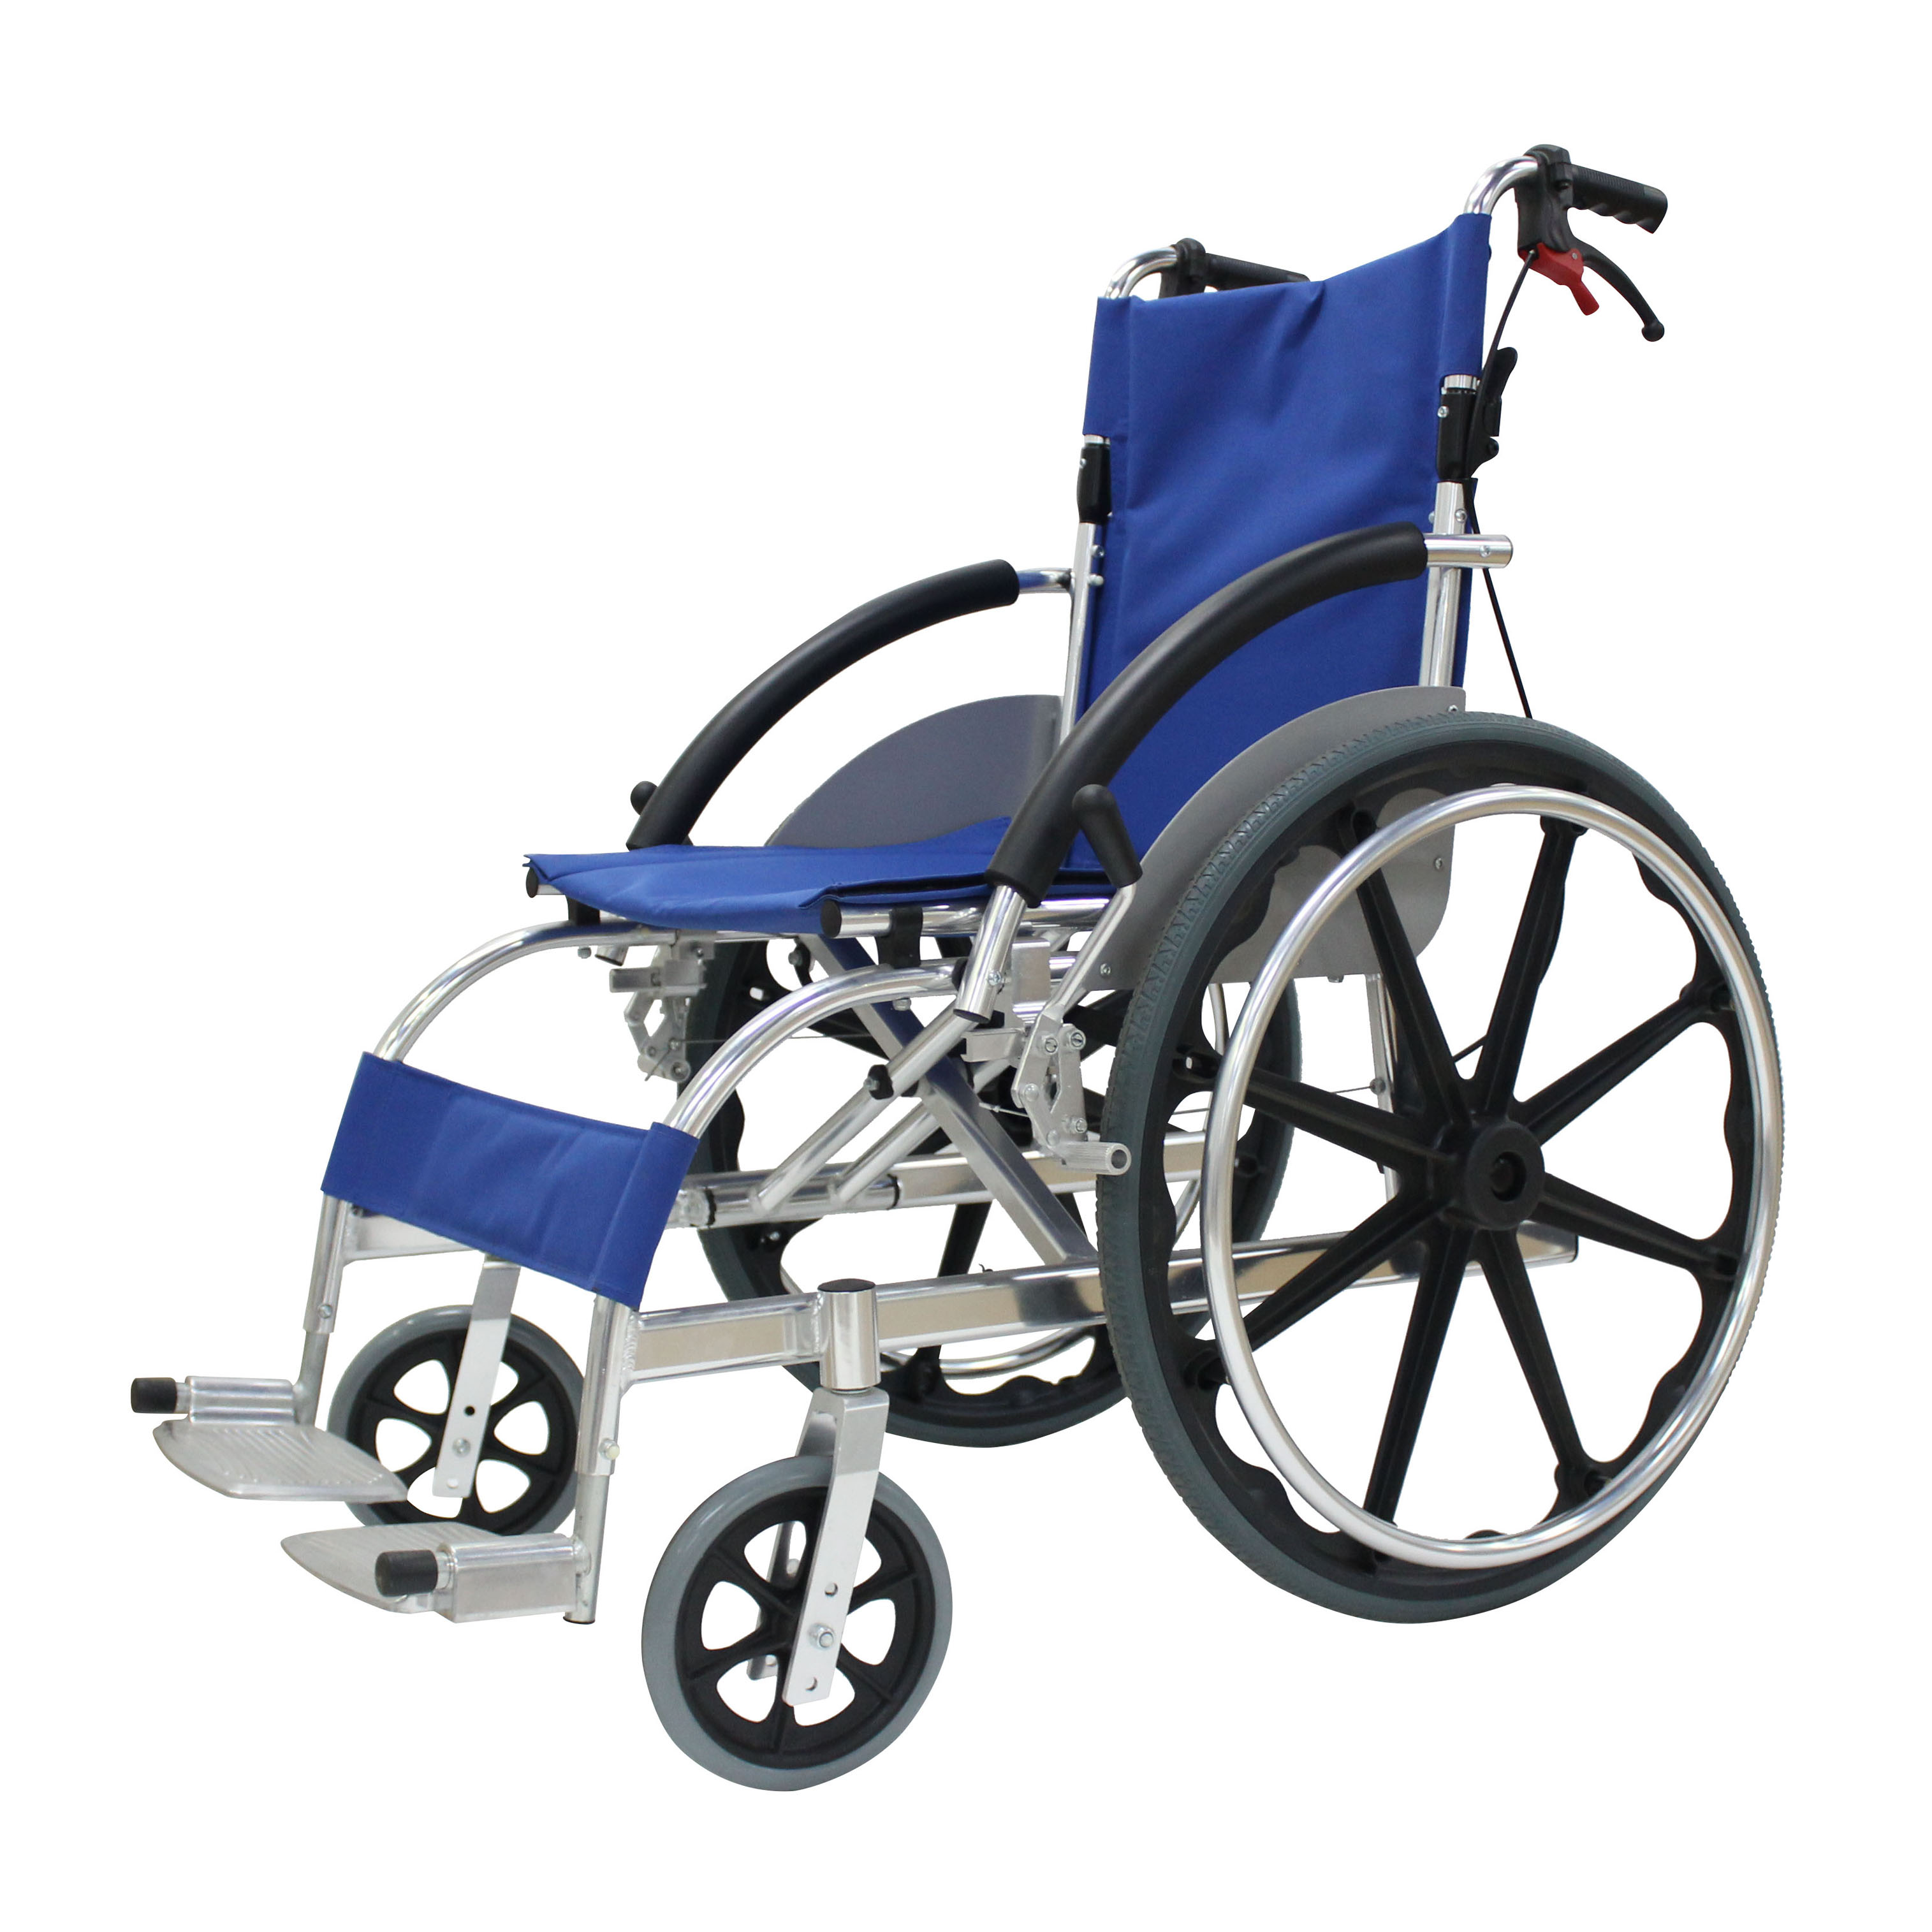 Physical Therapy Equipment good quality best selling products light weight wheelchair